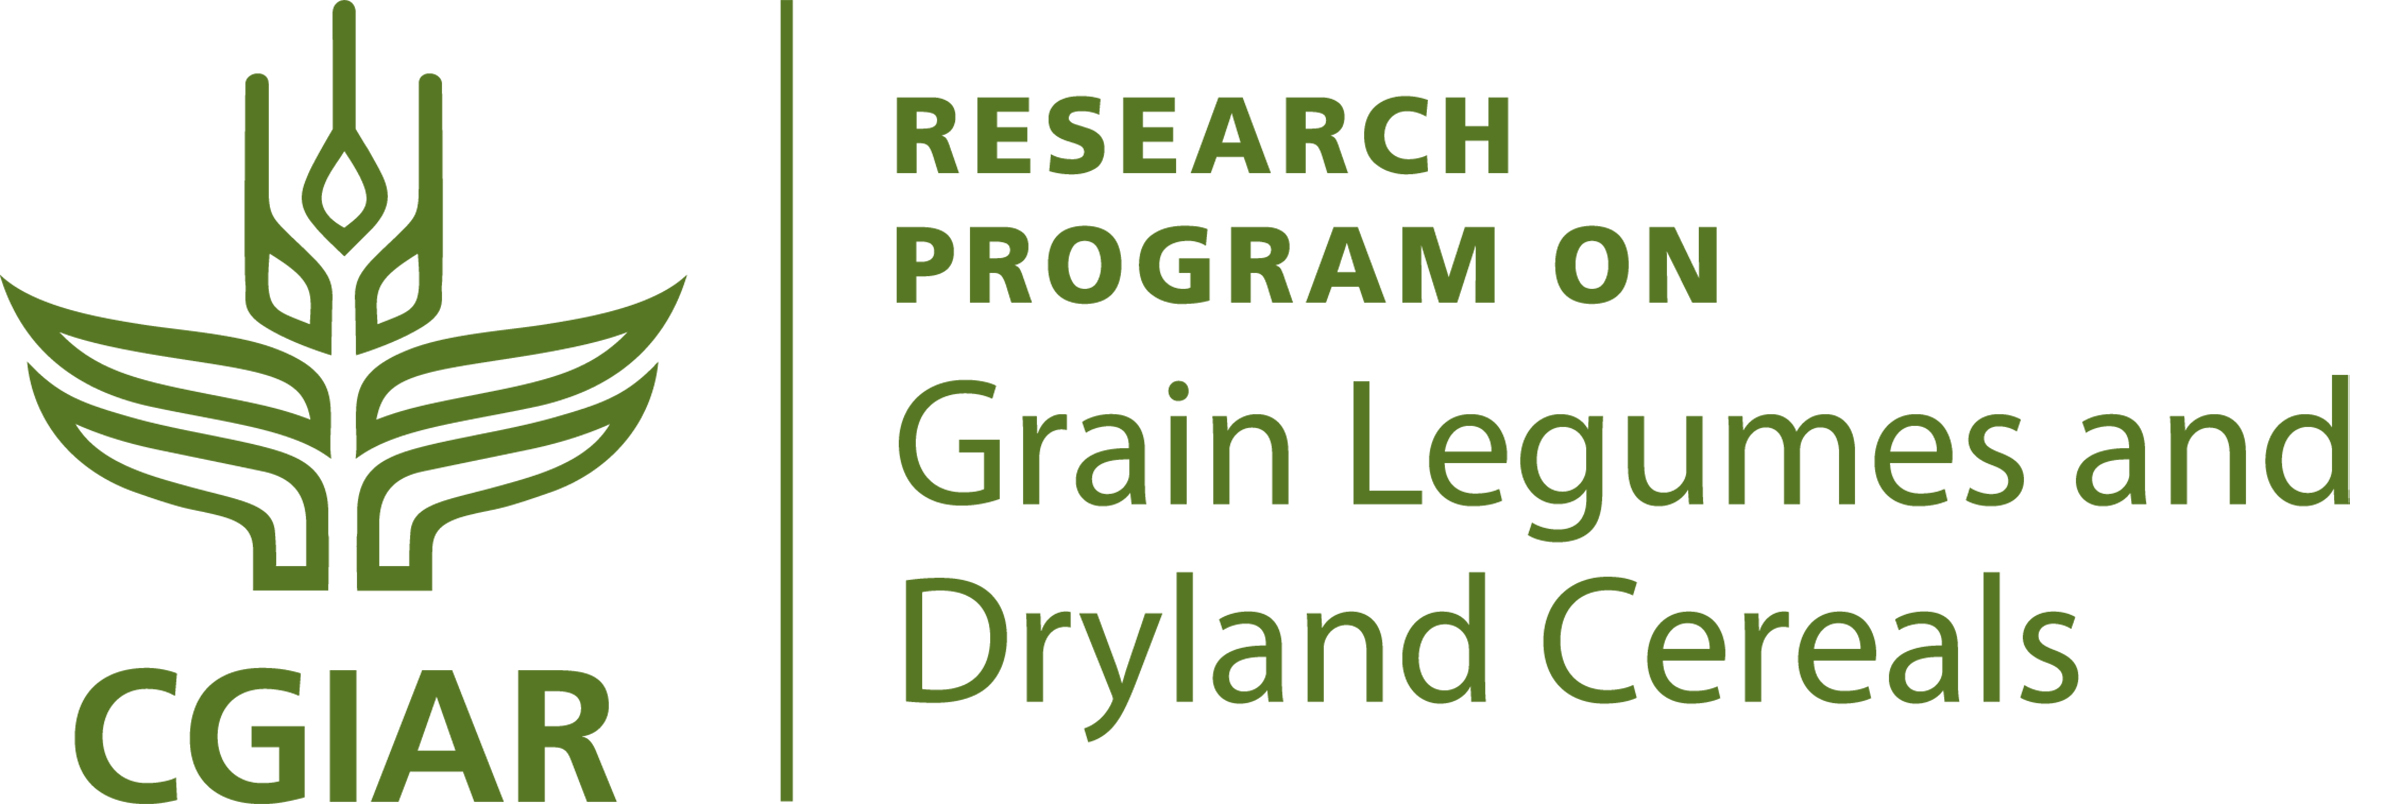 This work was undertaken as part of, and funded by the CGIAR Research Program on Grain Legumes and Dryland Cereals (GLDC) and supported by CGIAR Fund Donors.